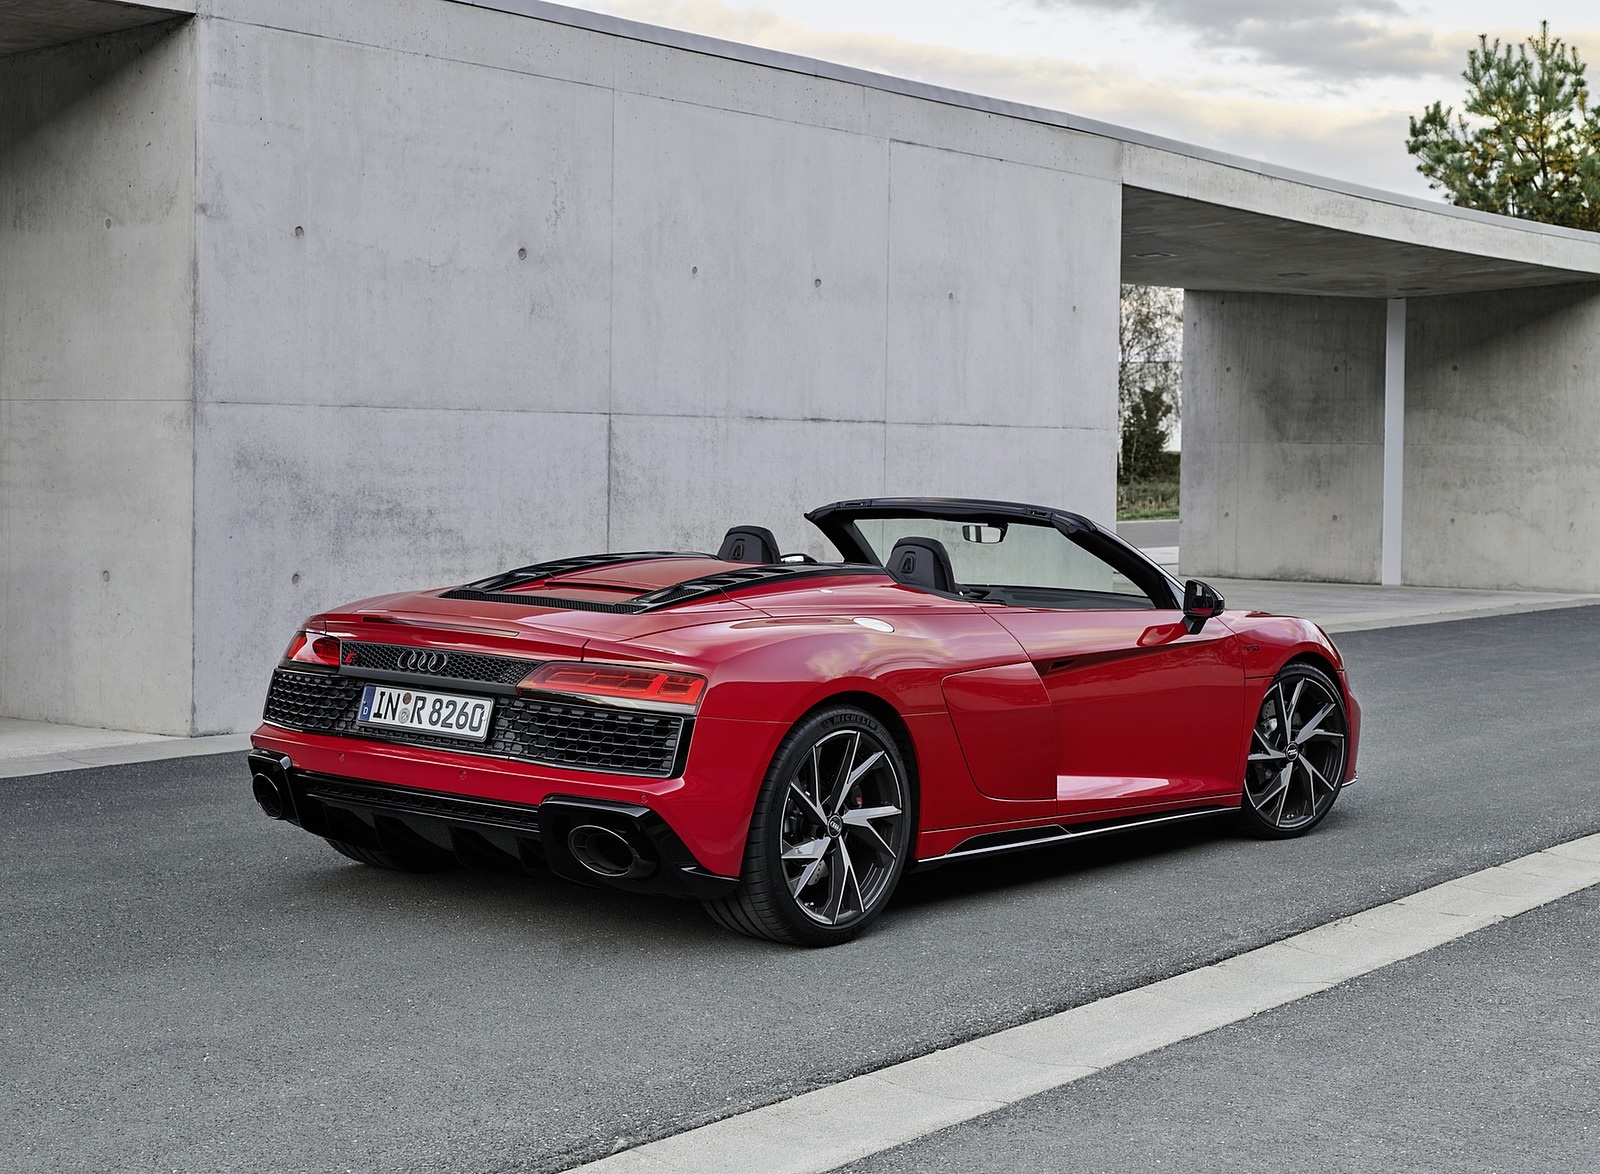 2020 Audi R8 V10 RWD Spyder (Color: Tango Red) Rear Three-Quarter Wallpapers #16 of 31